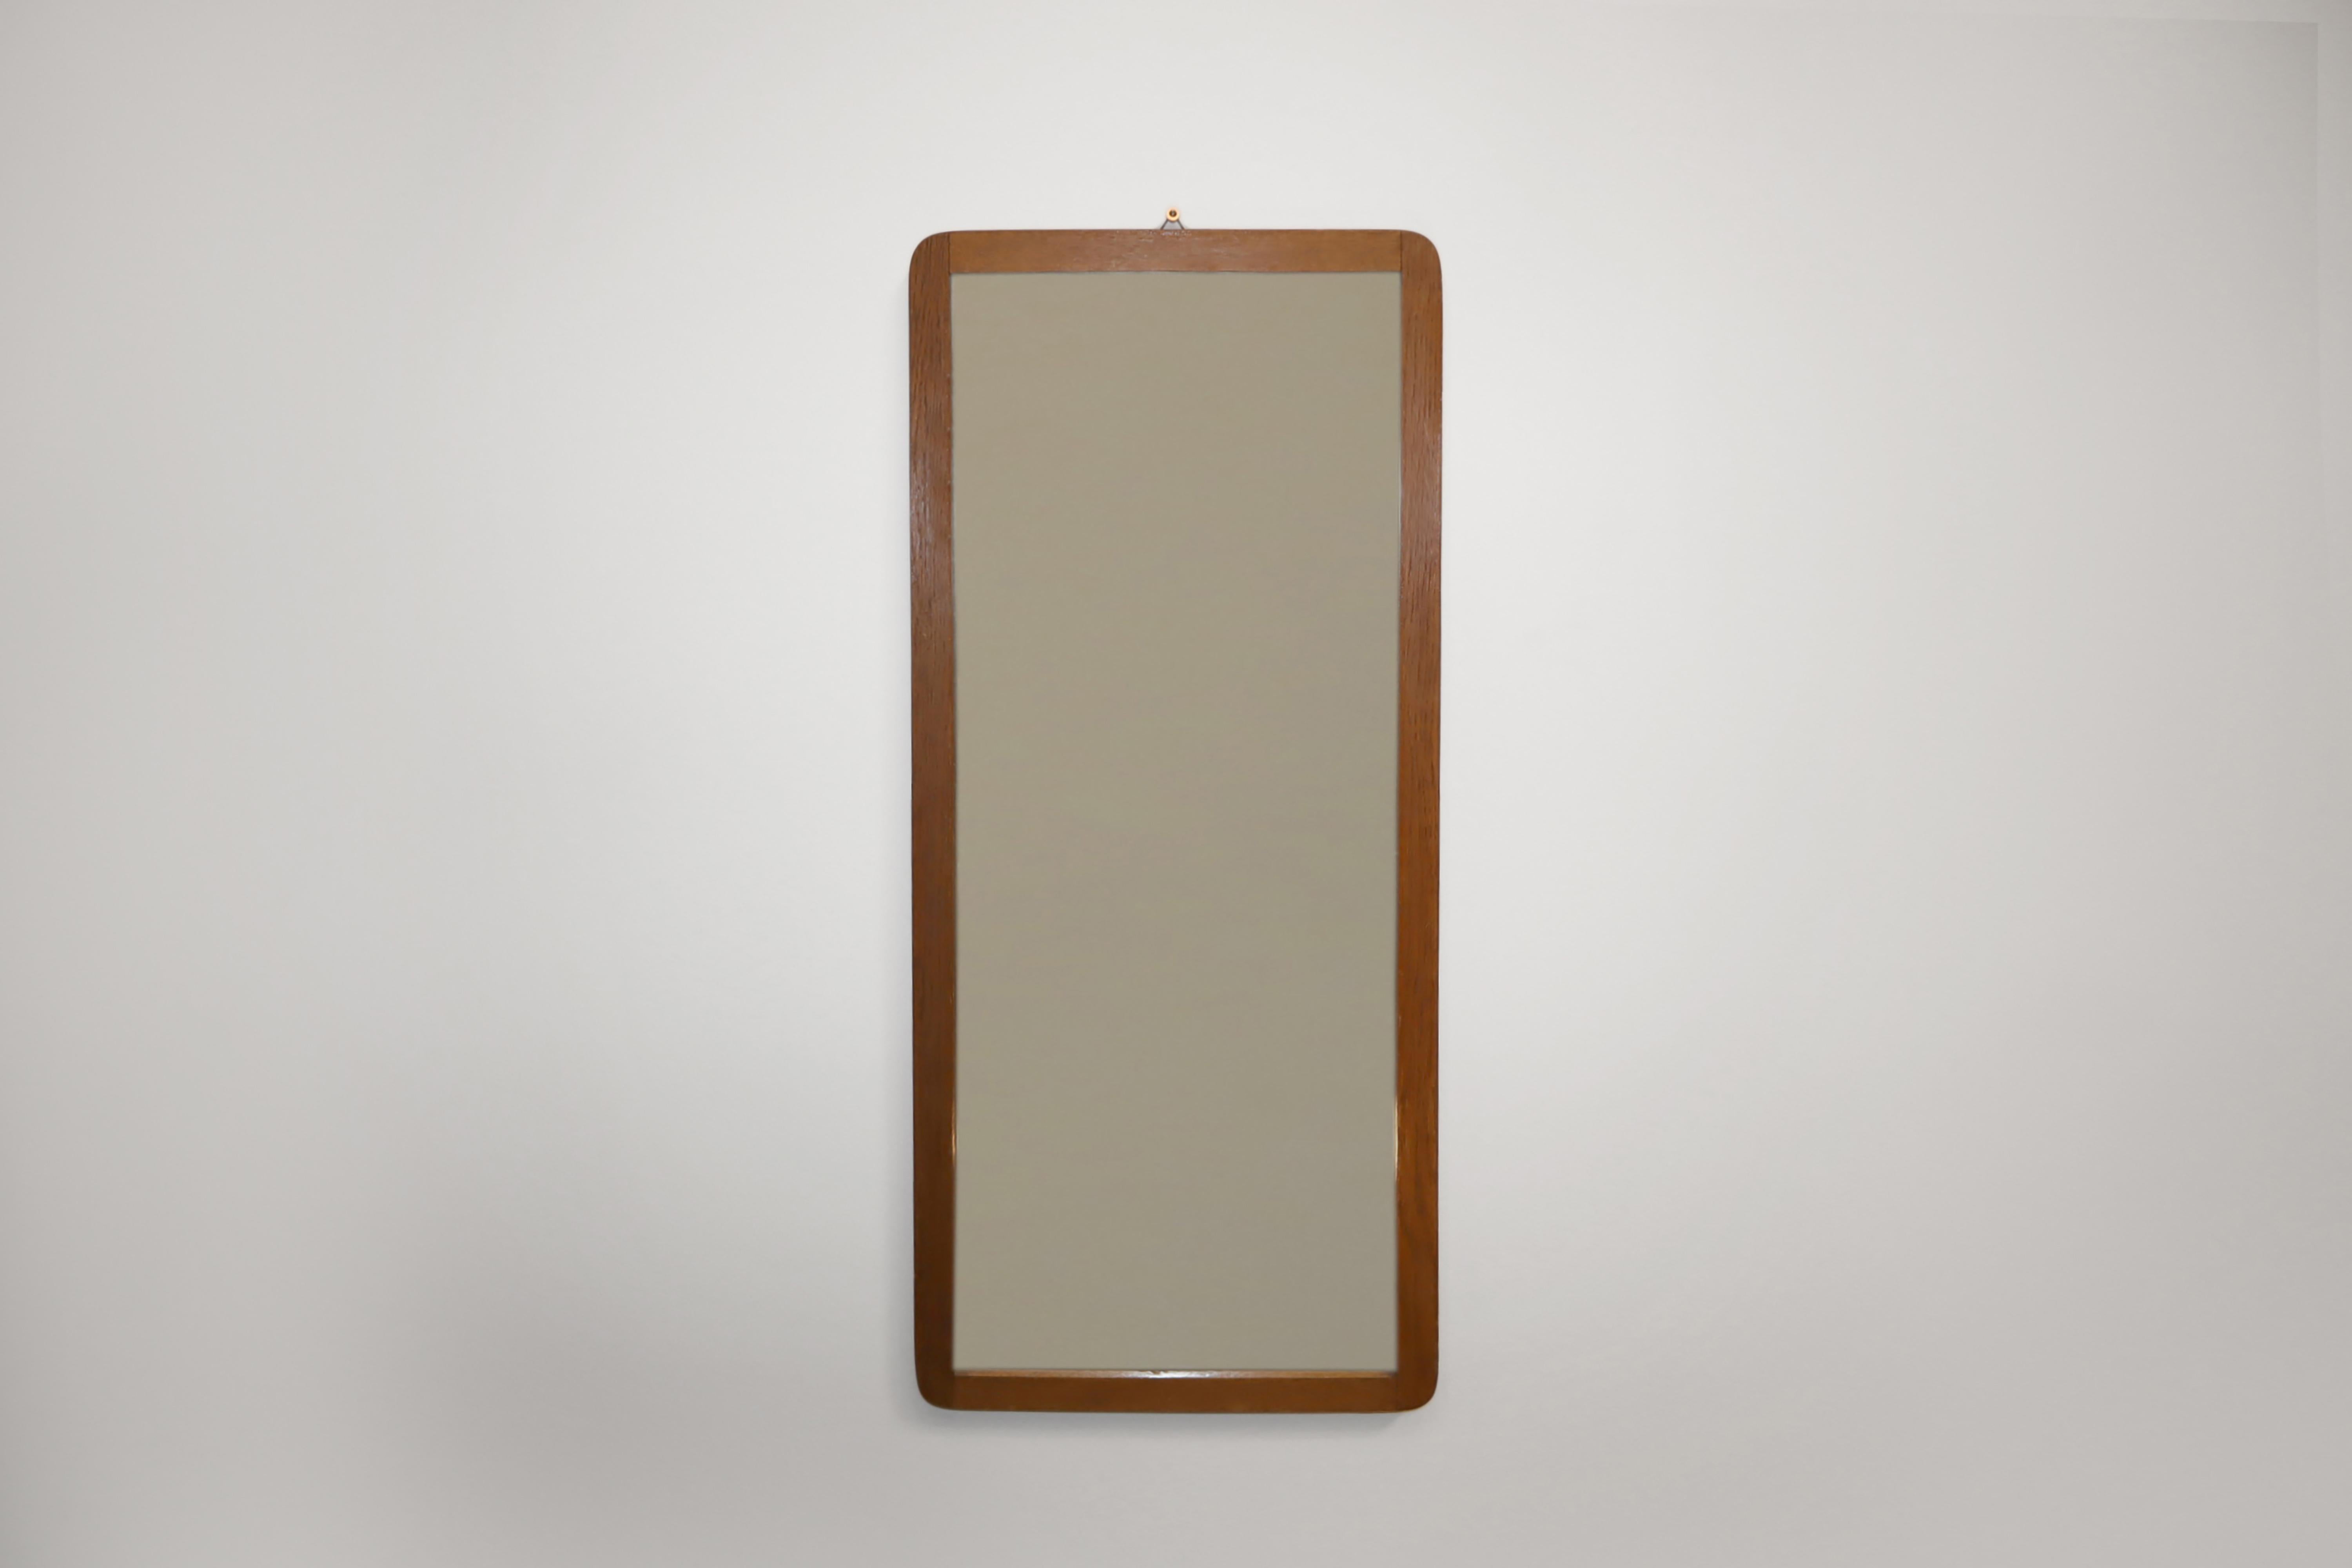 Mid-Century Modern Scandinavian wall hanging mirror in hardwood, probably teak. Made in Denmark in 1960s.

This mirror is constructed in wood. It is rectangular in shape with rounded corners and attractive mortice and tenon joints, which get